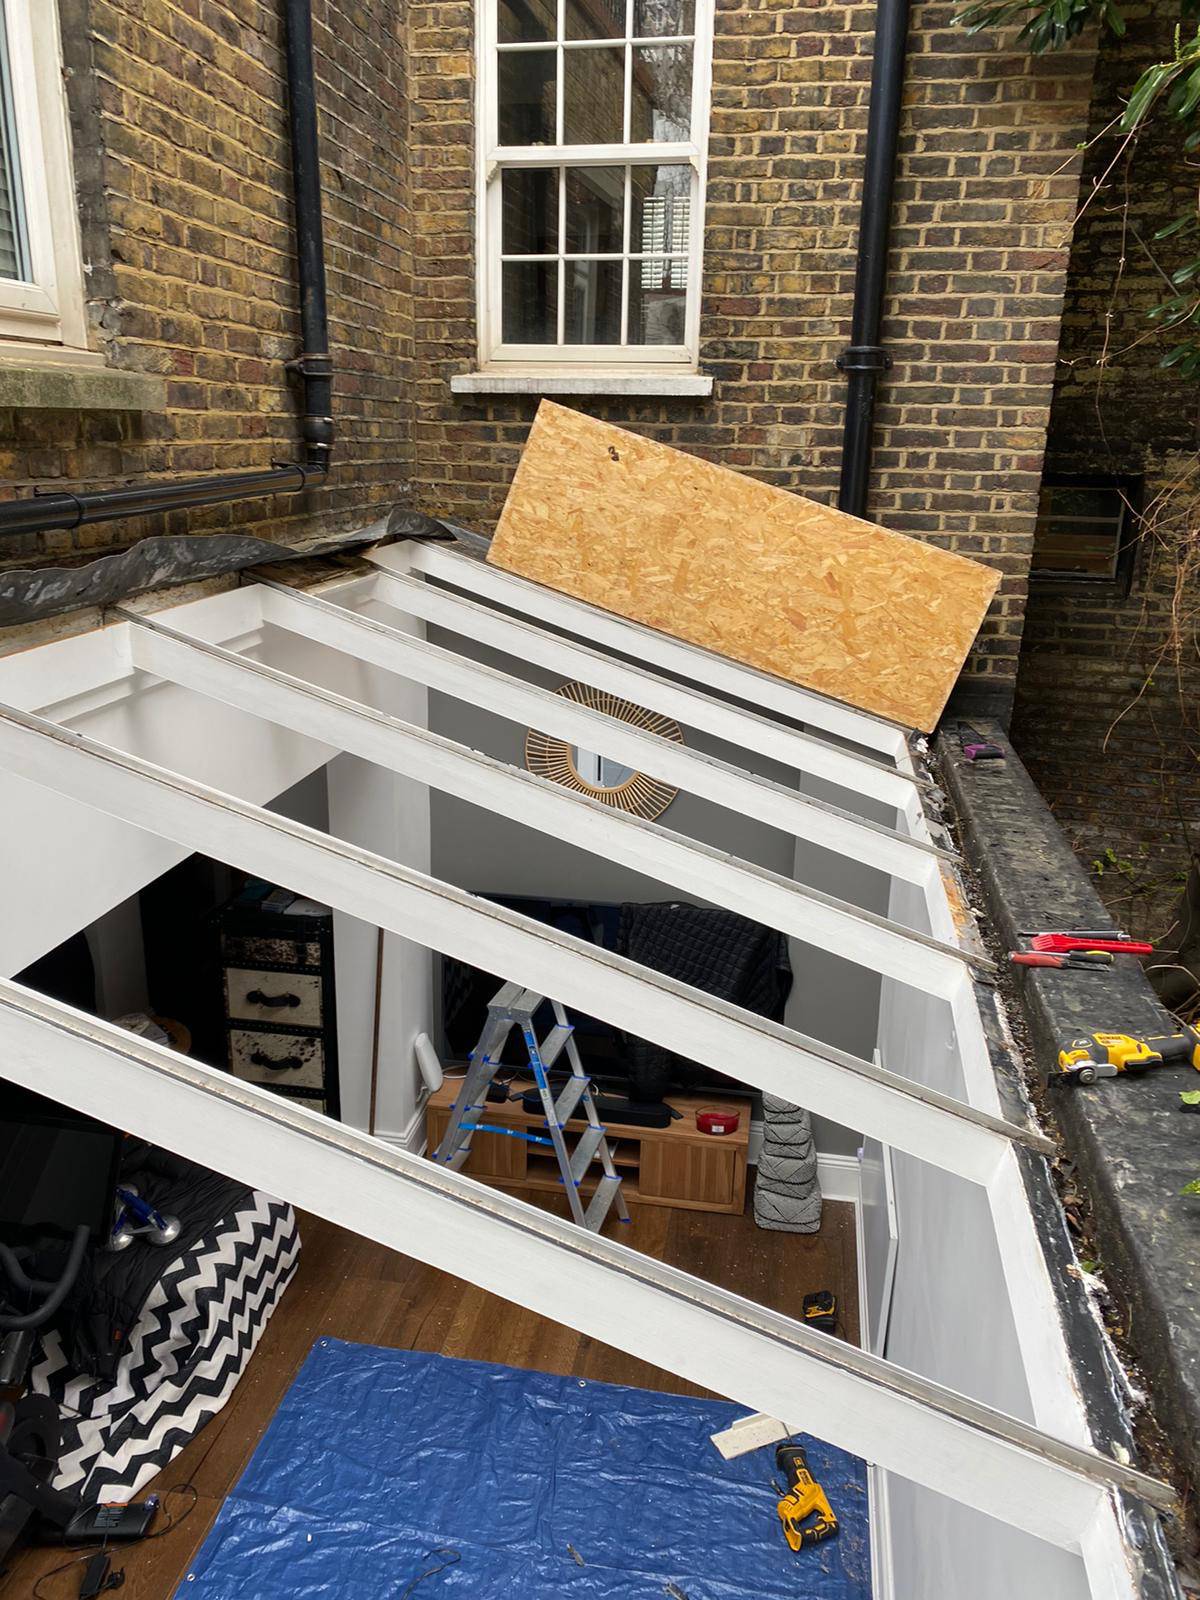 process of putting new windows by specialists